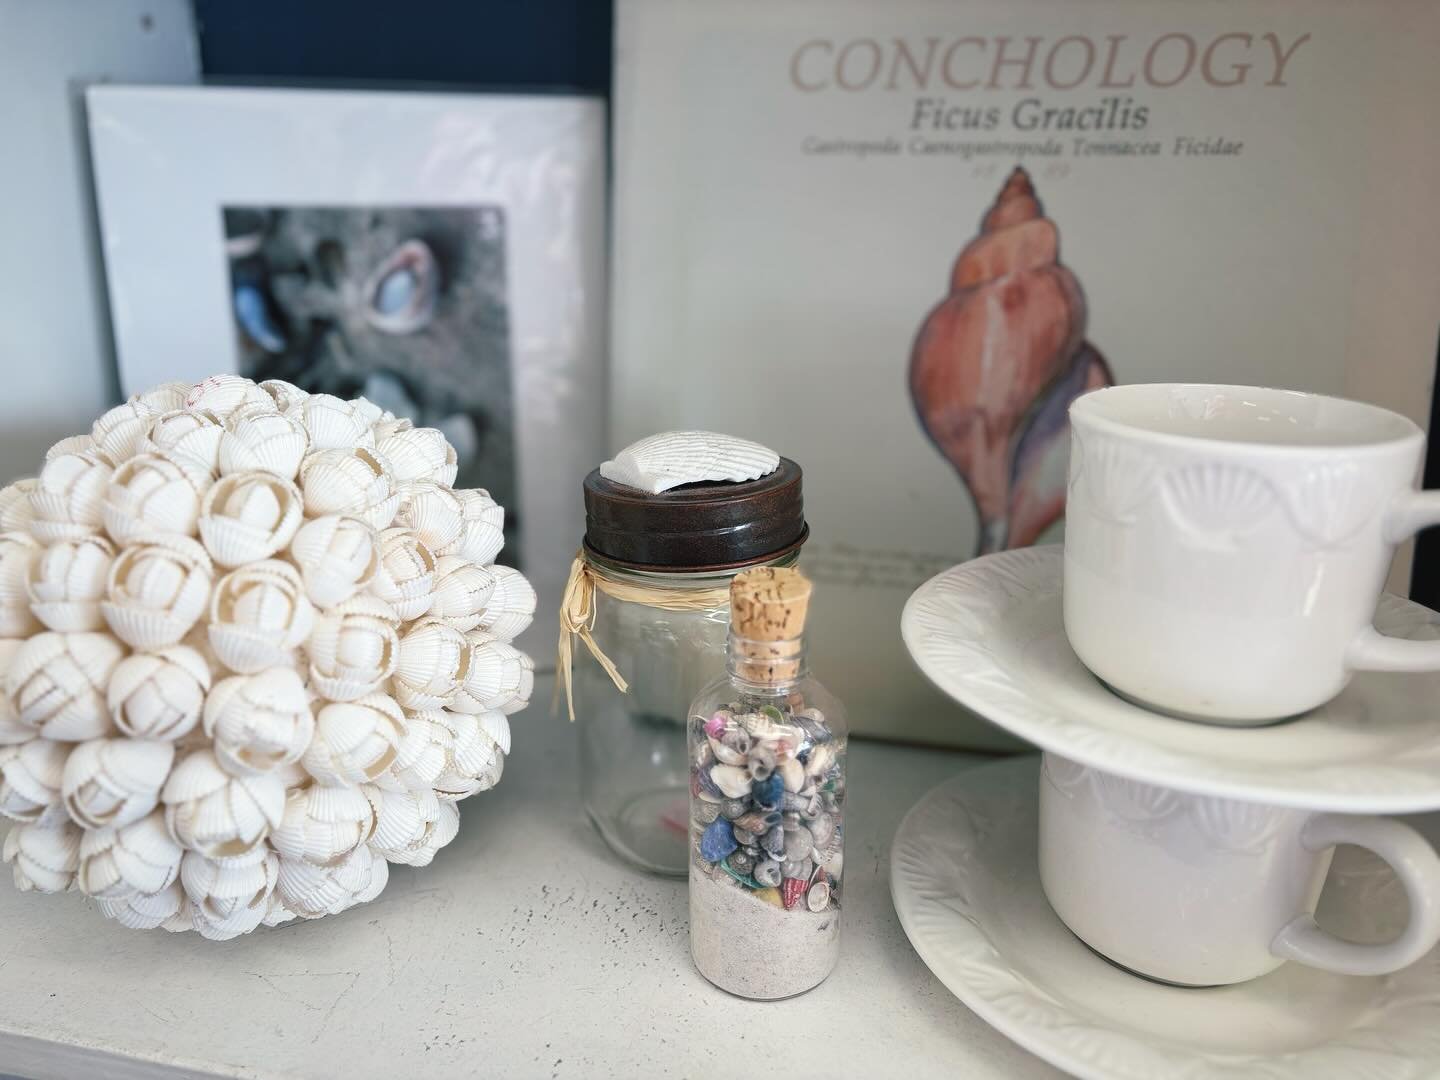 Check out some of our new best shellers 🐚

#coastal #coastaldecor #shells #shellart #newenglandhome #shellcollection #collectibles #shoplical #shopstoningtonct #thrifted #thriftedhome #thrifthappy